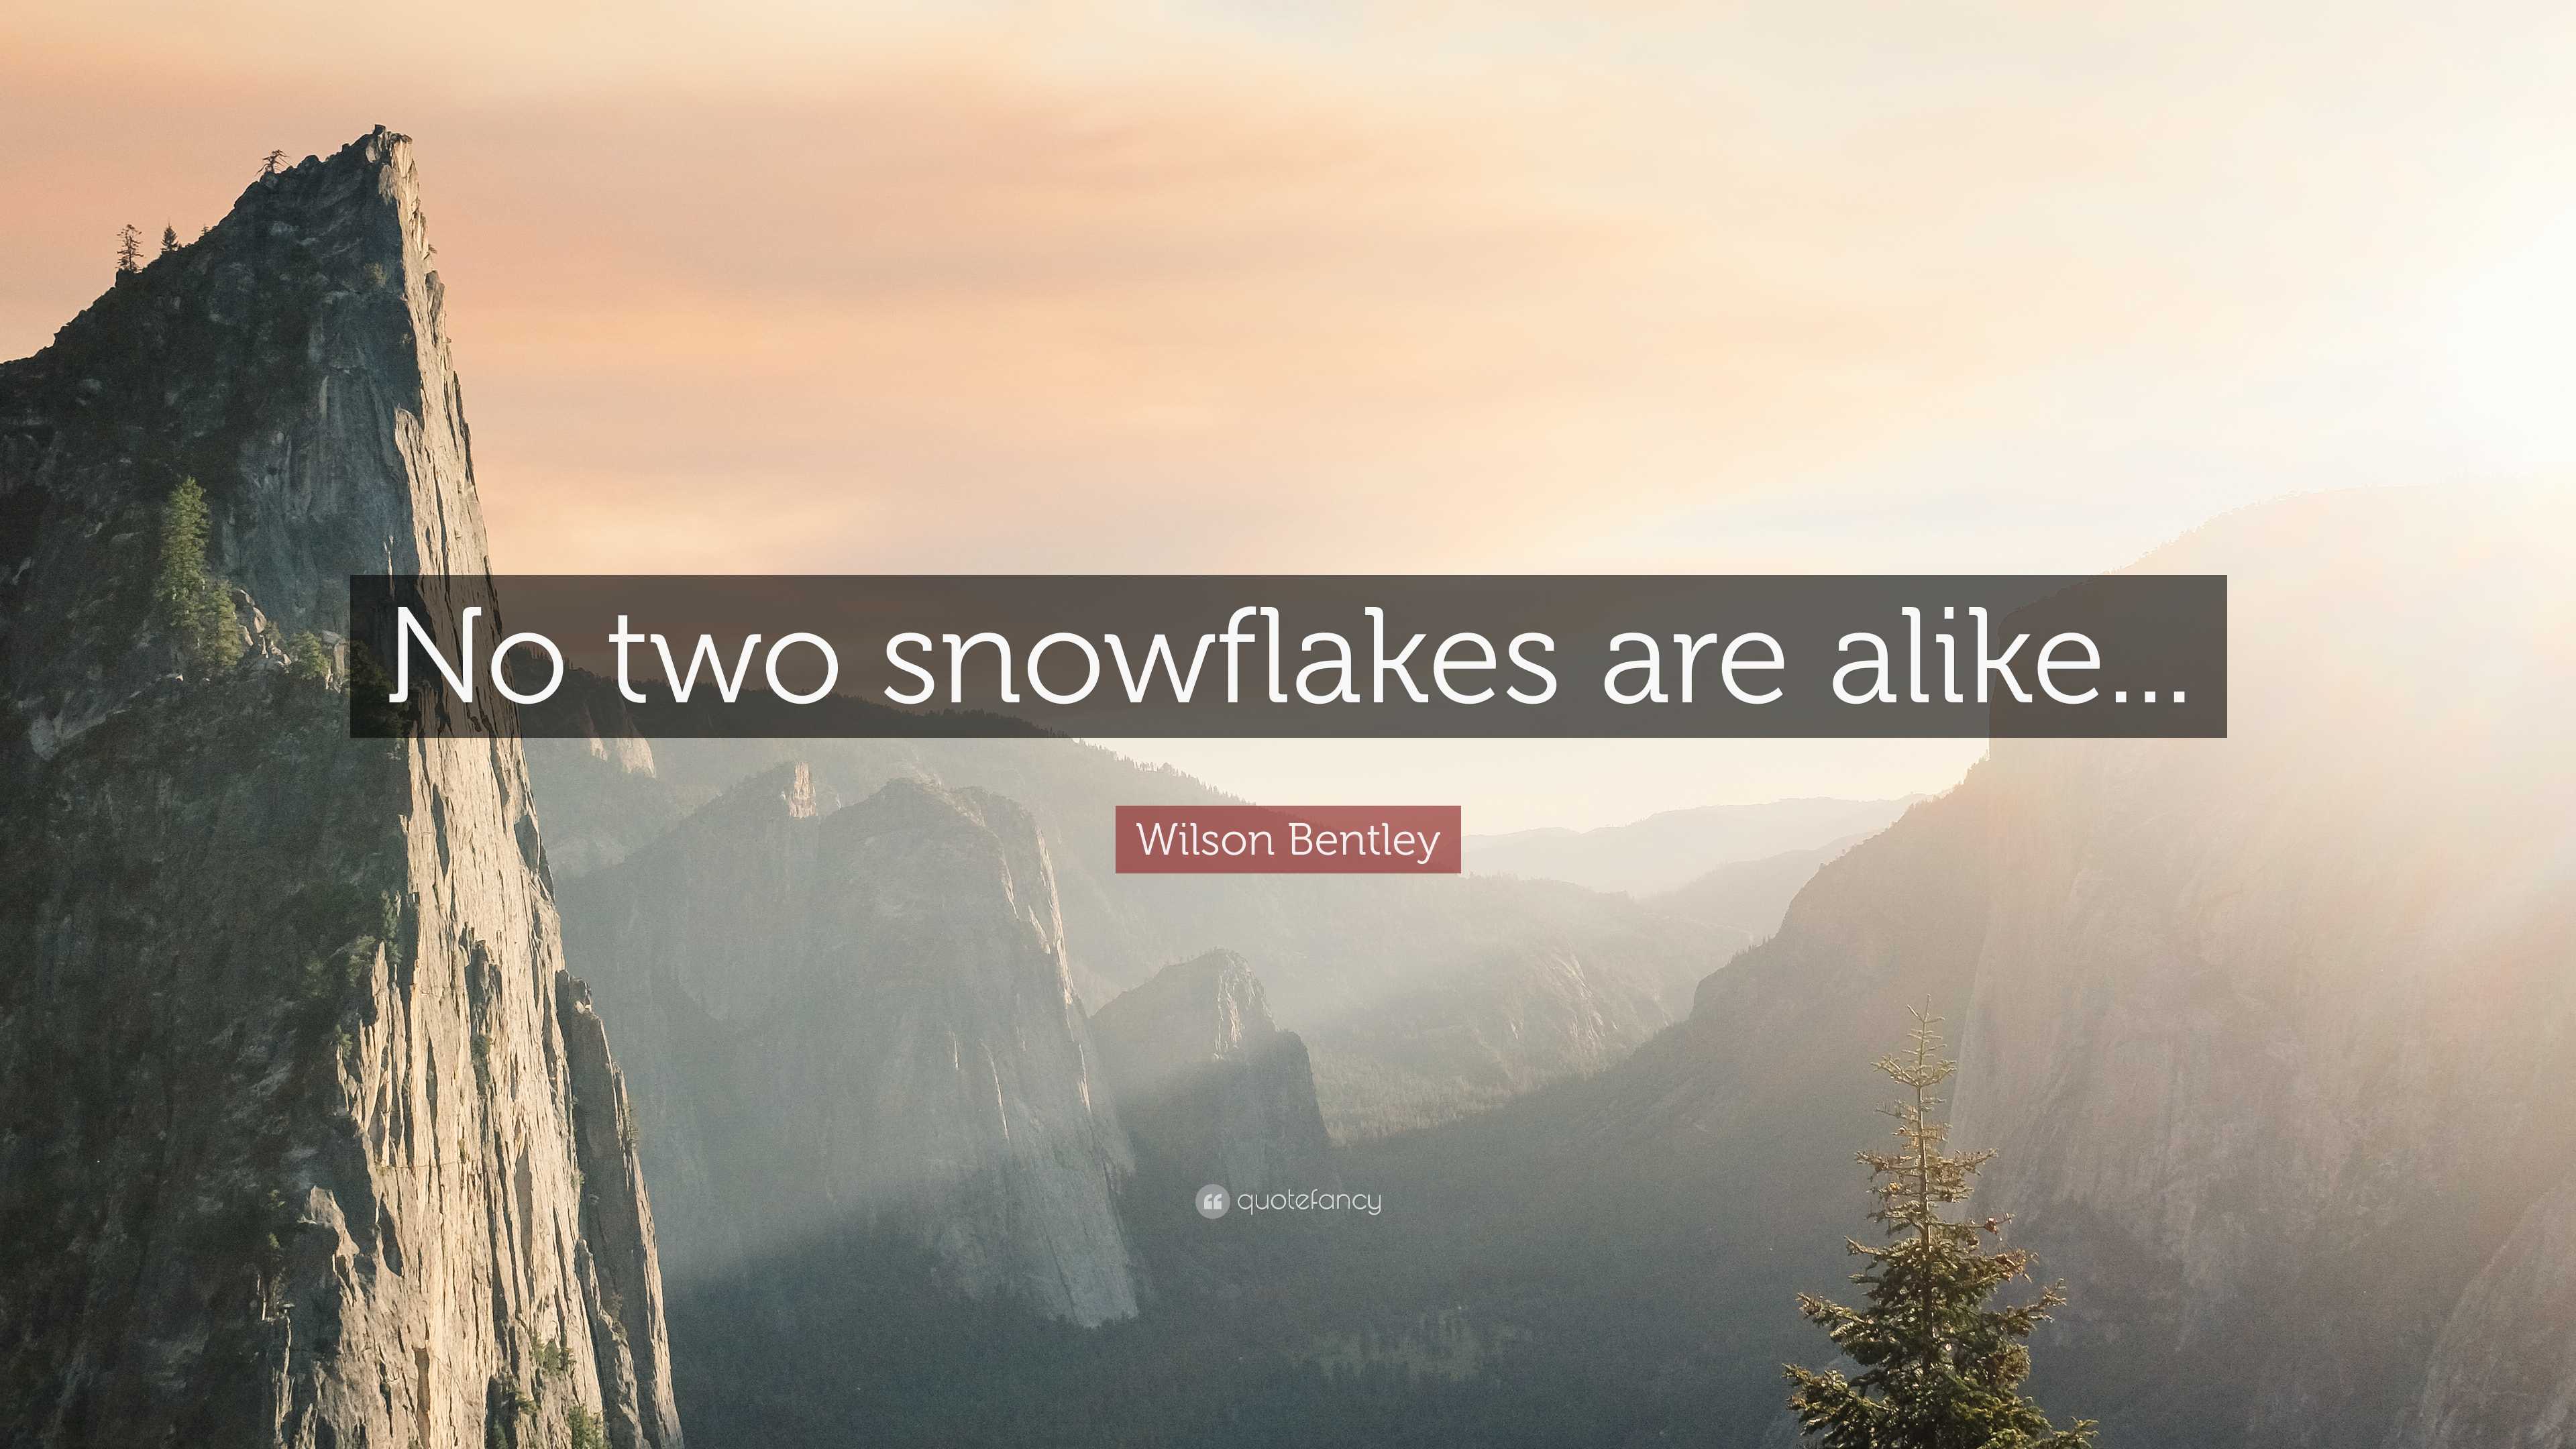 Myth buster: No two snowflakes are alike? Very likely, but it's hard to  prove